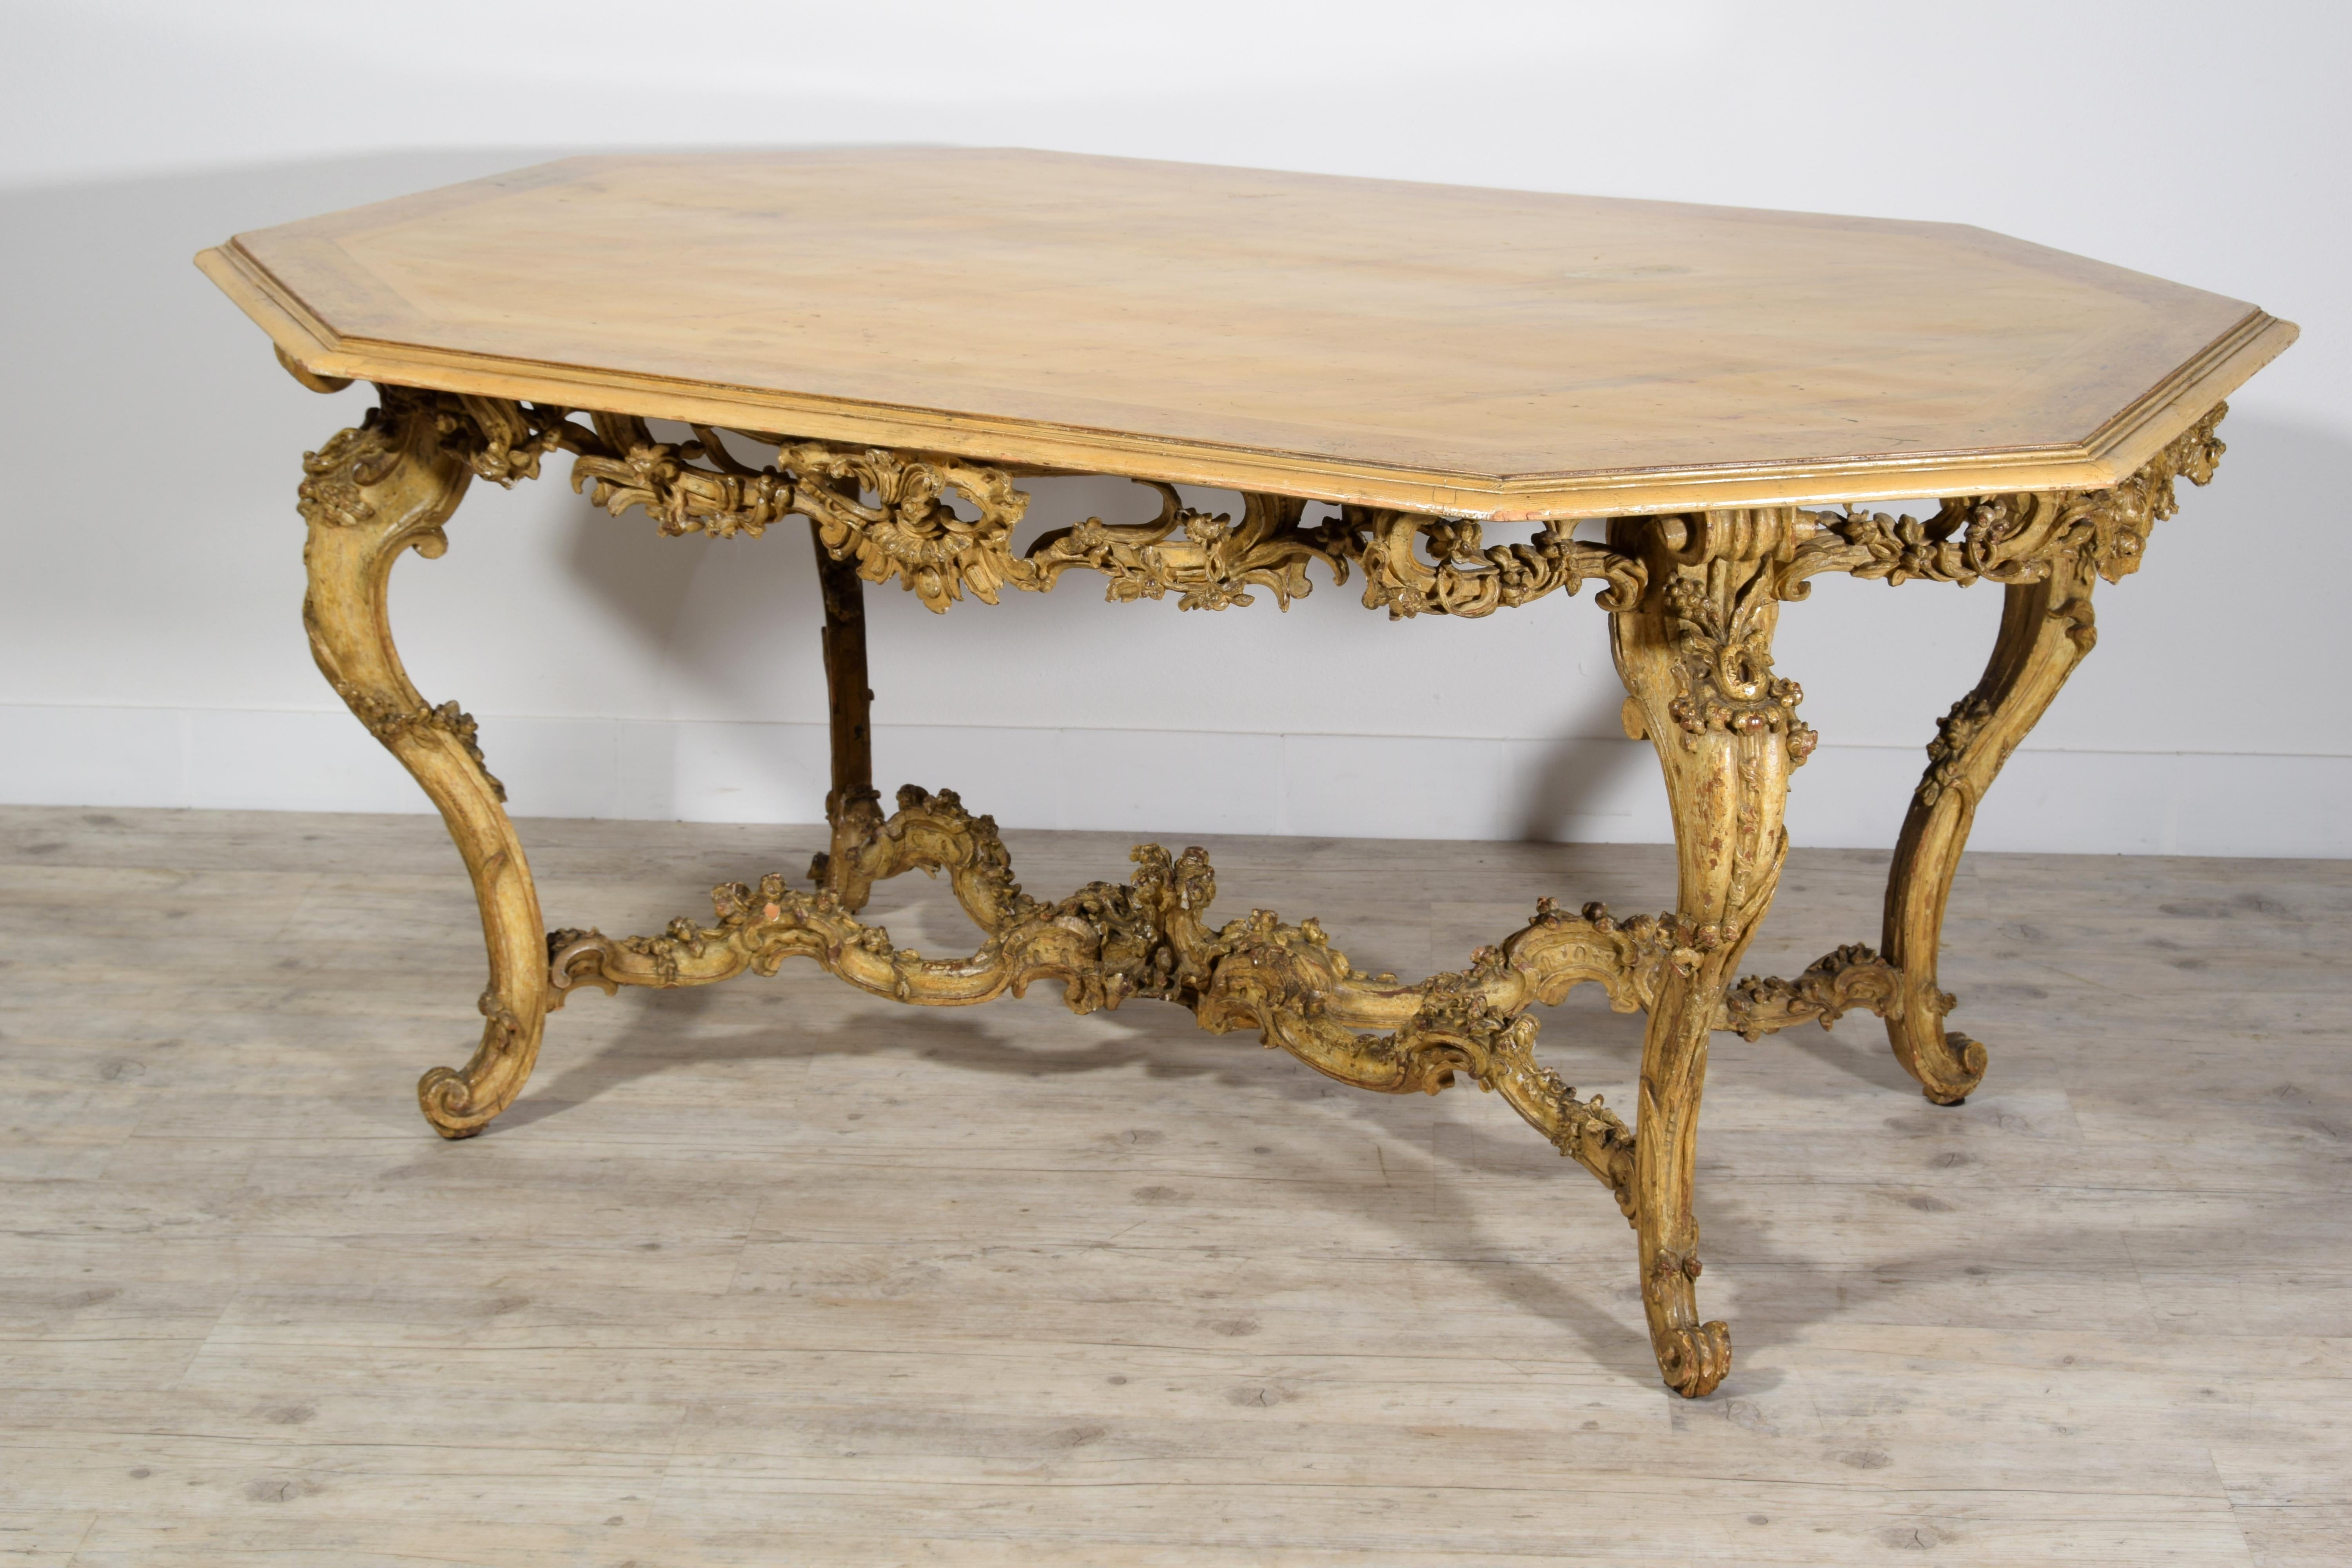 Italian Baroque Carved Gilt and Lacquered Wood Center Table, 18th Century For Sale 1